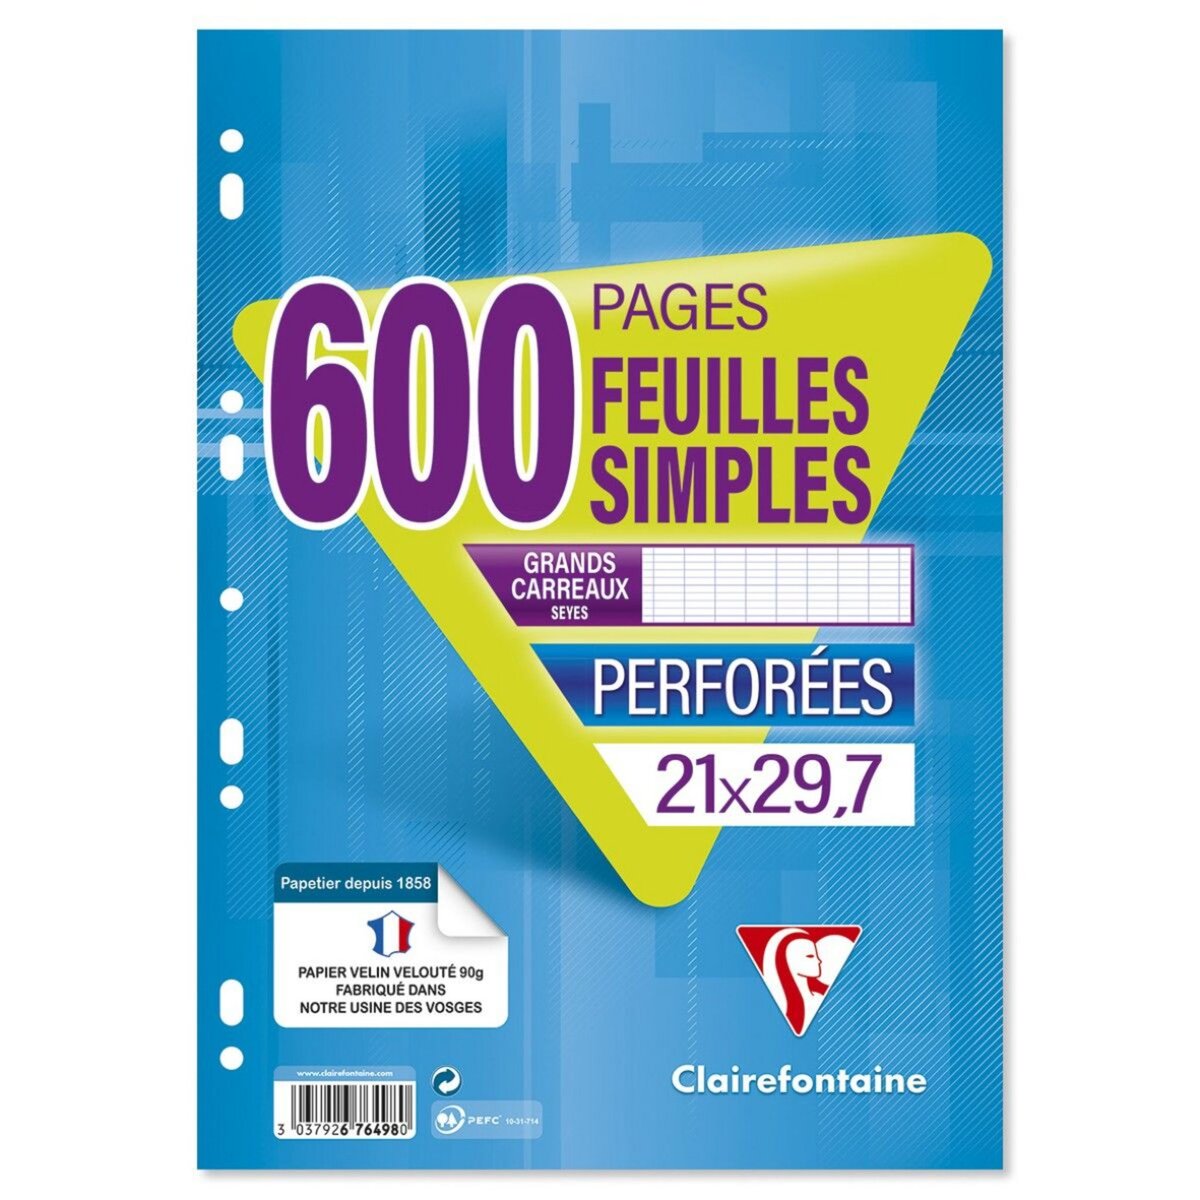 Feuilles simples ClaireFontaine pas cher - Achat neuf et occasion